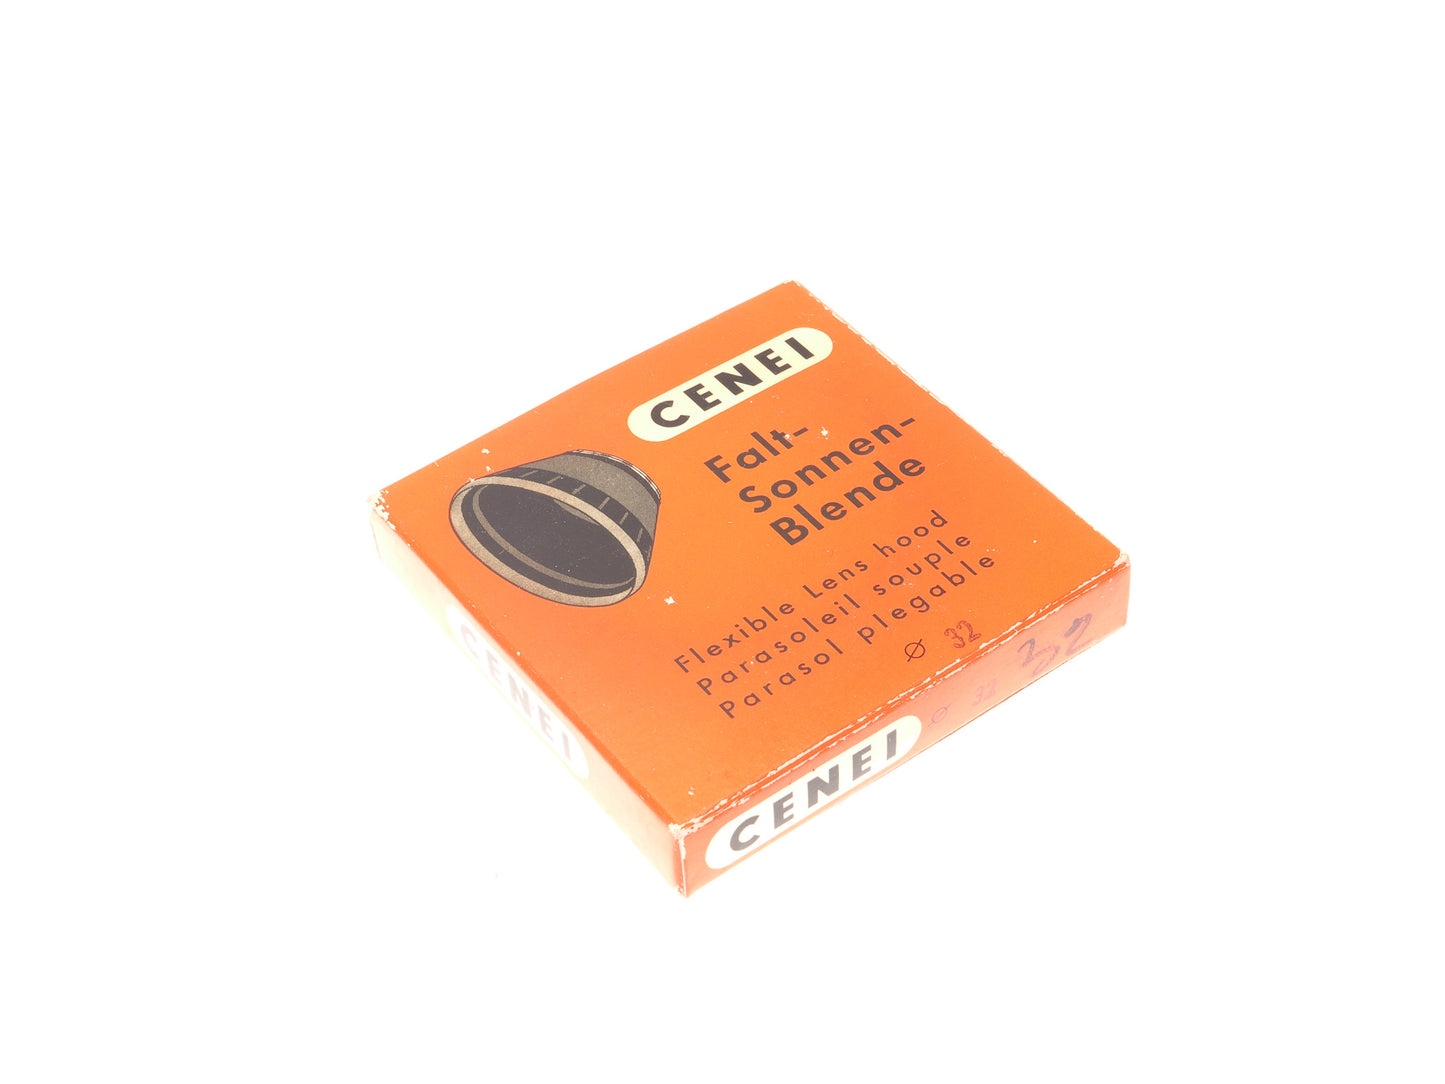 Cenei 32mm Collapsible Rubber Lens Hood